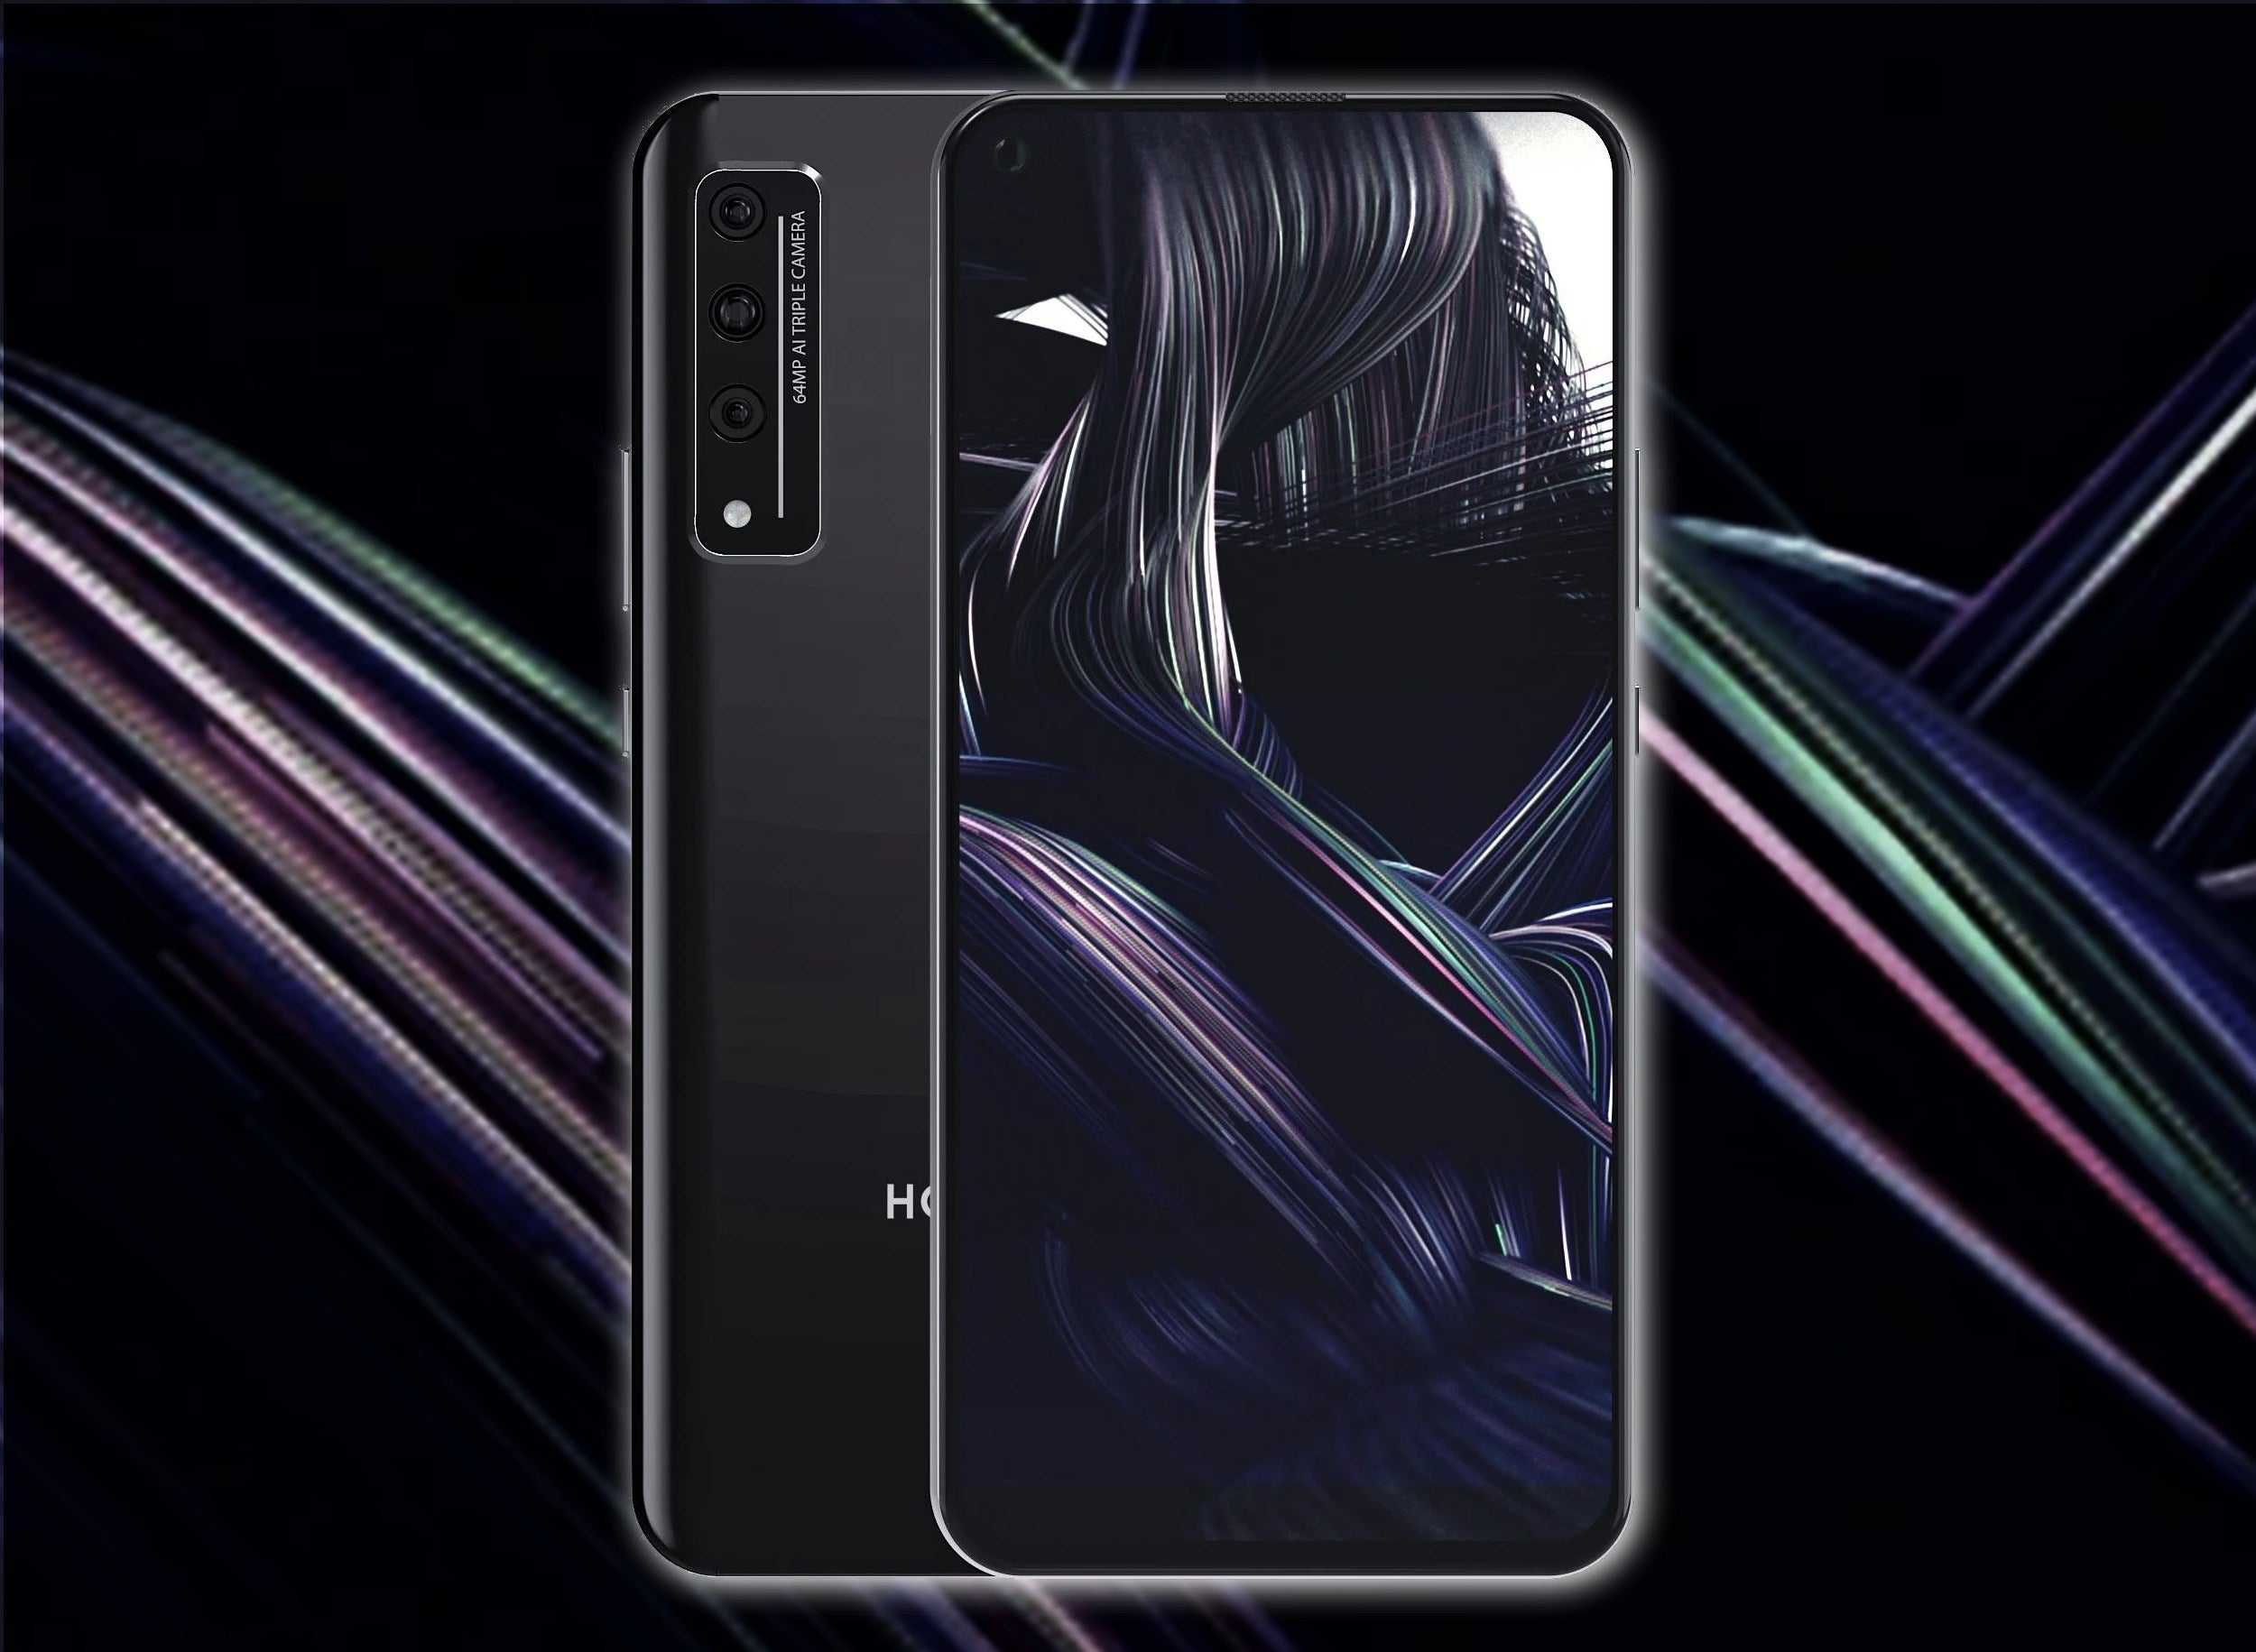 honor-10x-pro-render-suggests-punch-hole-display-and-64mp-camera